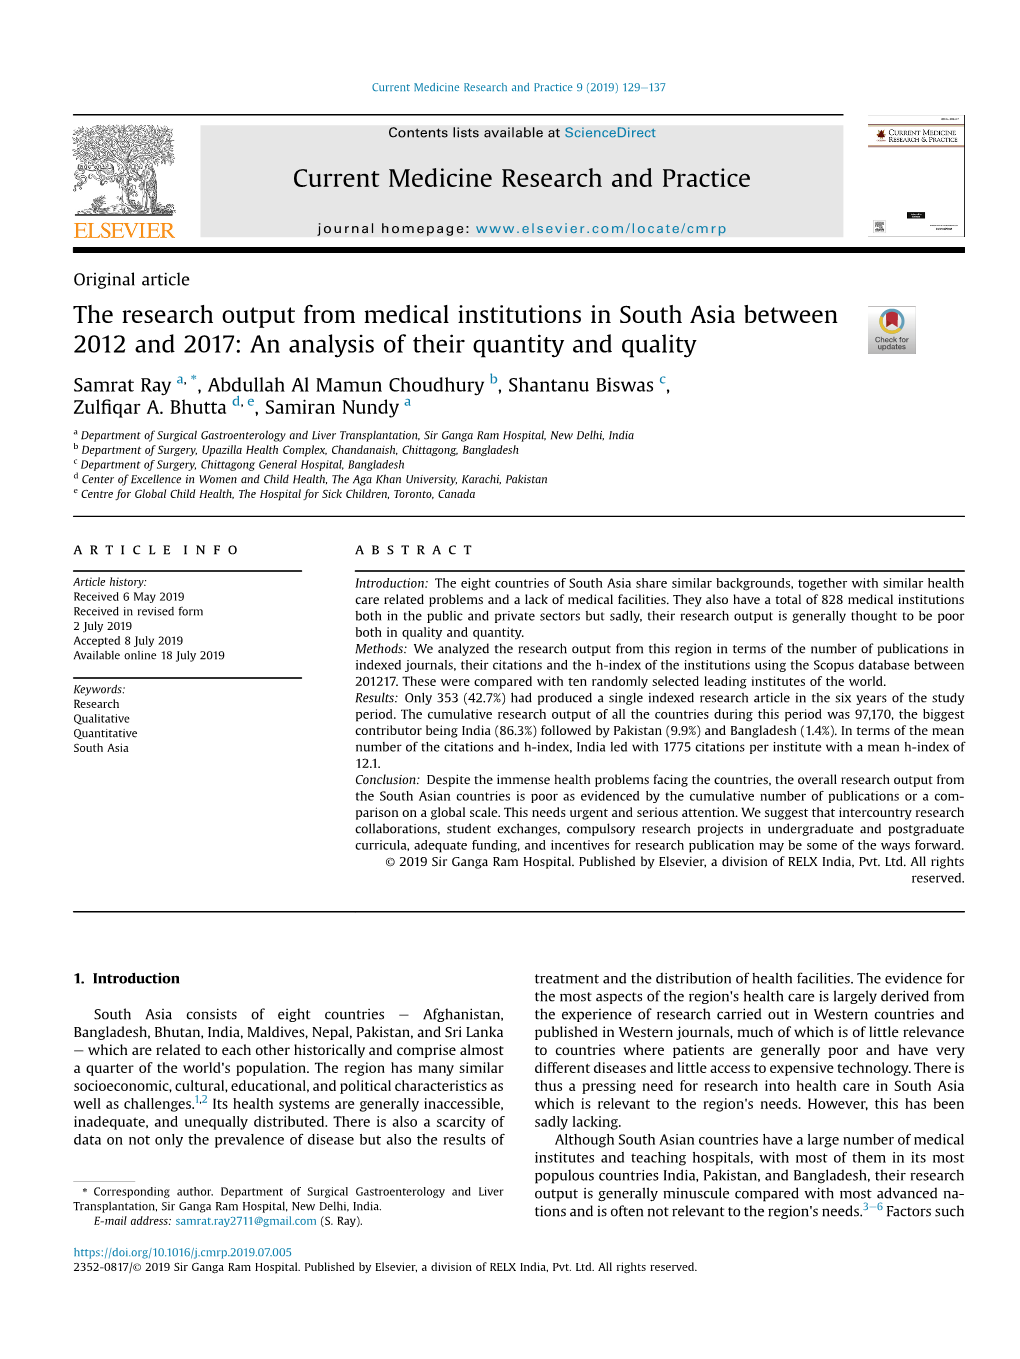 The Research Output from Medical Institutions in South Asia Between 2012 and 2017: an Analysis of Their Quantity and Quality